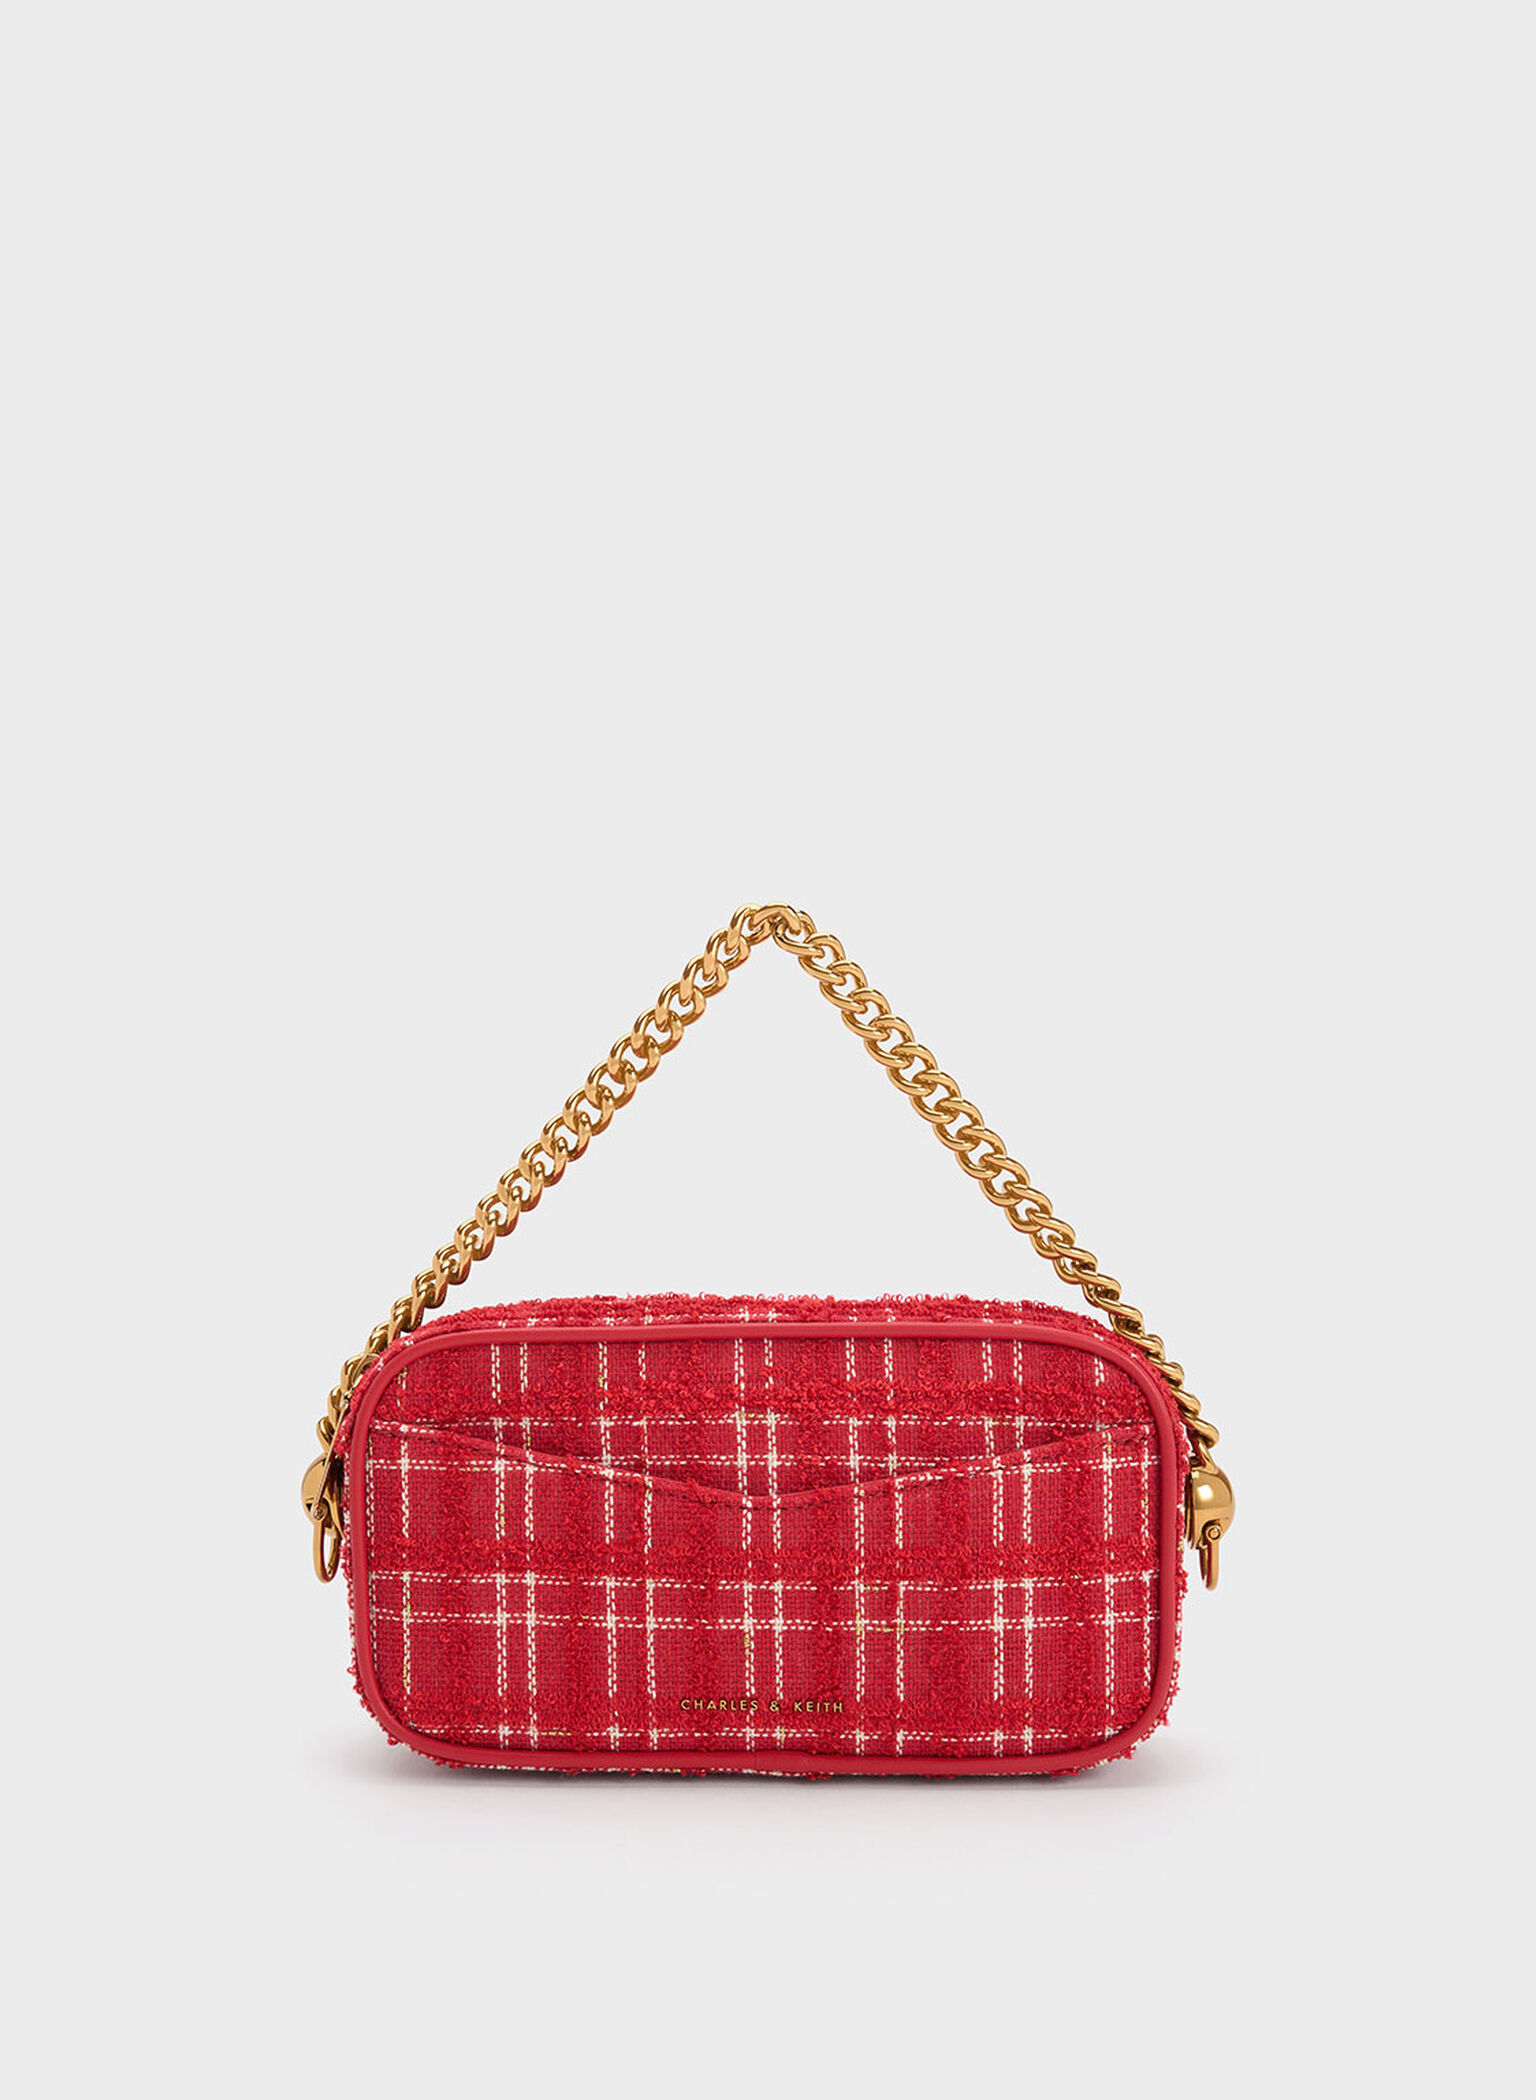 Charles & Keith - Women's Cayce Tweed Boxy Crossbody Bag, Red, S